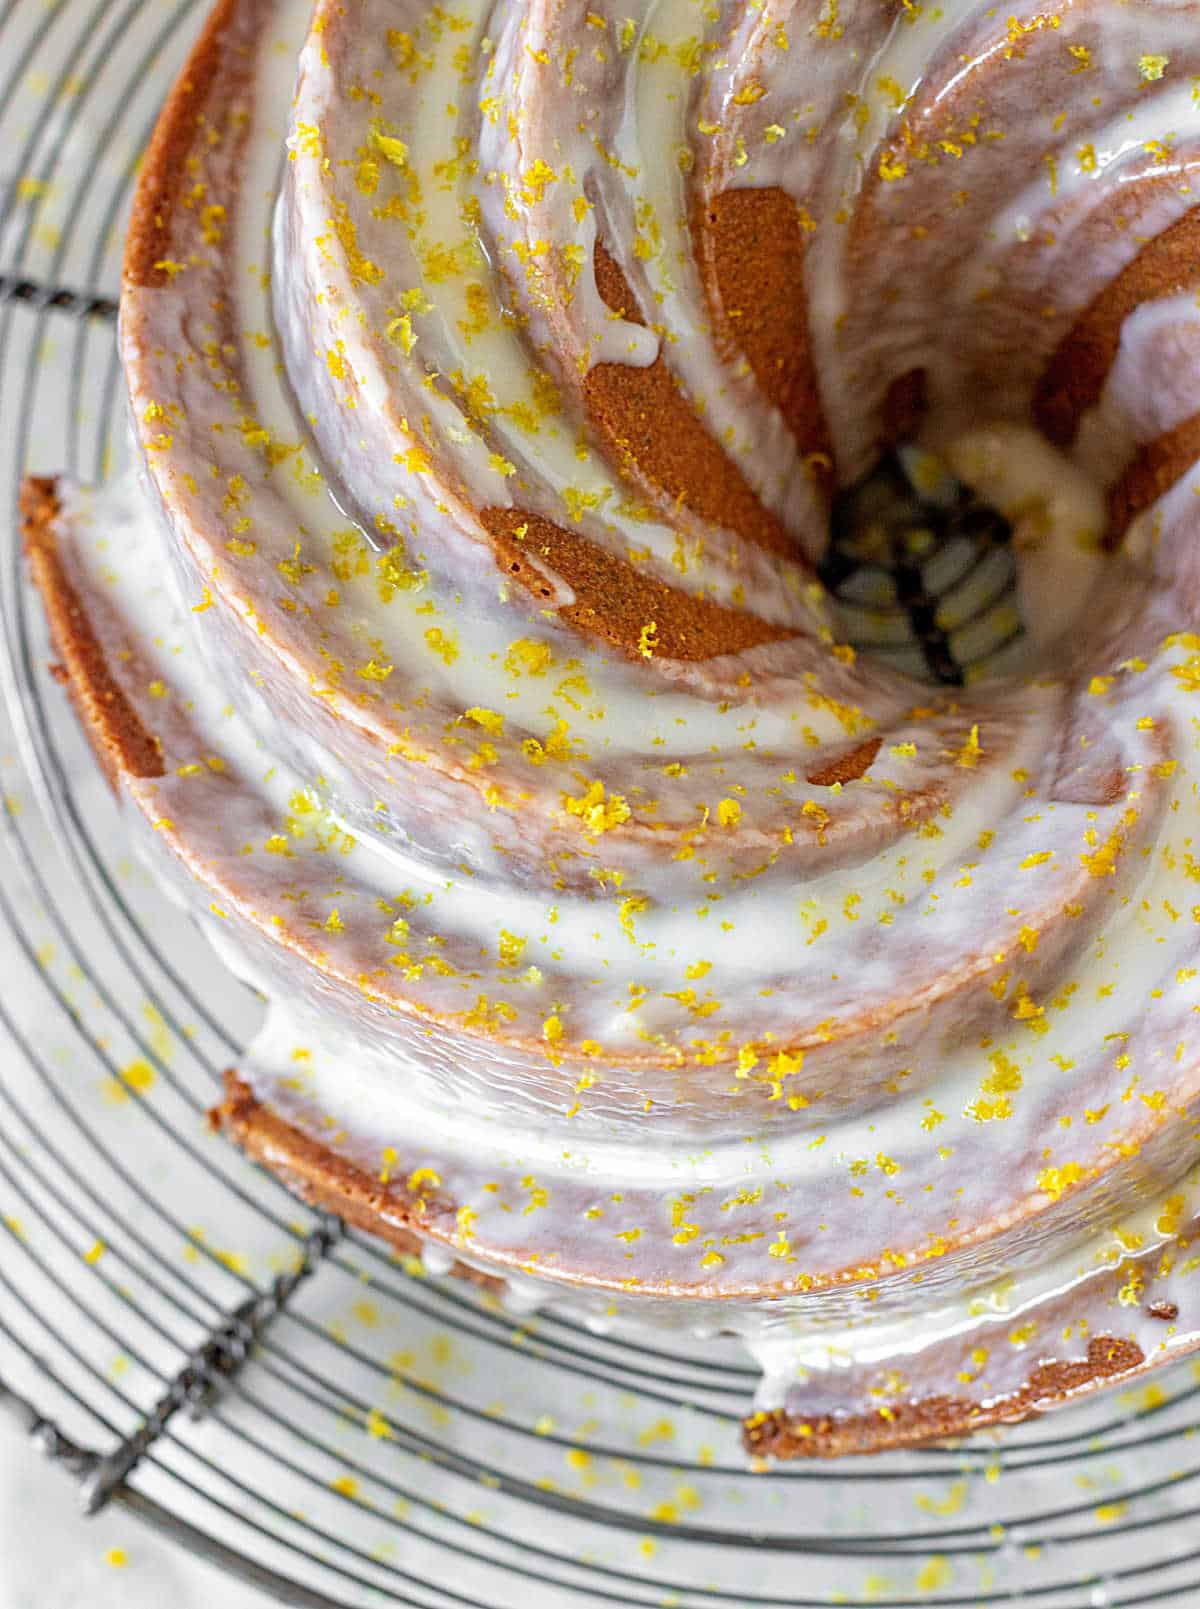 Top view of partial glazed bundt cake with lemon zest on a wire rack